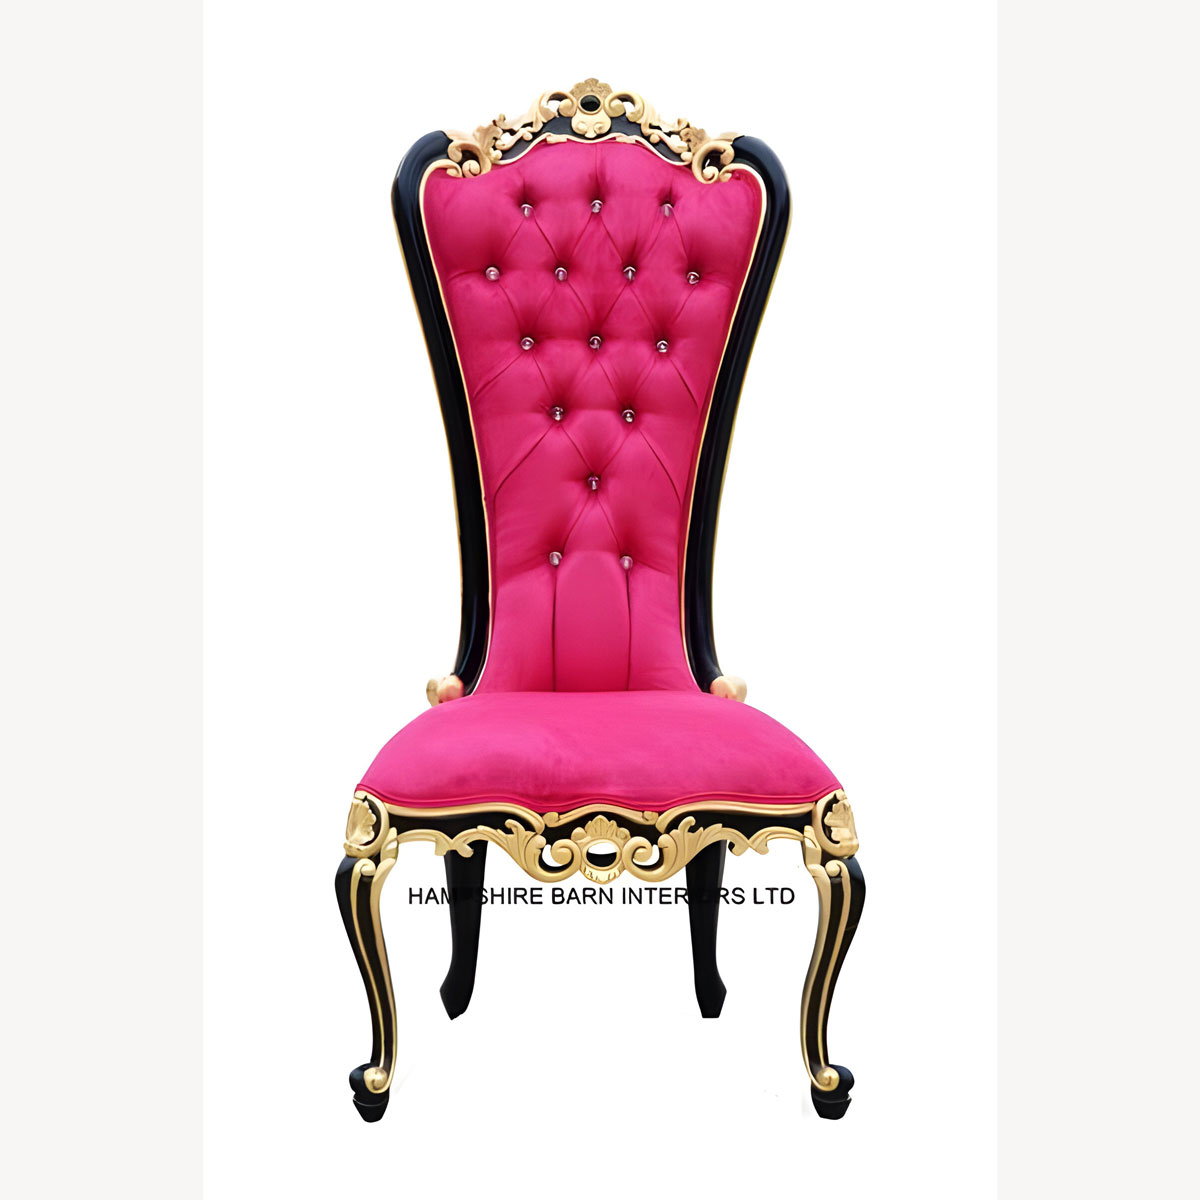 Fuchsia Pink Chair Mayfair Dining Throne Black And Gold Baroque With Crystal Buttons 1 - Hampshire Barn Interiors - Fuchsia Pink Chair Mayfair Dining Throne Black And Gold Baroque With Crystal Buttons -